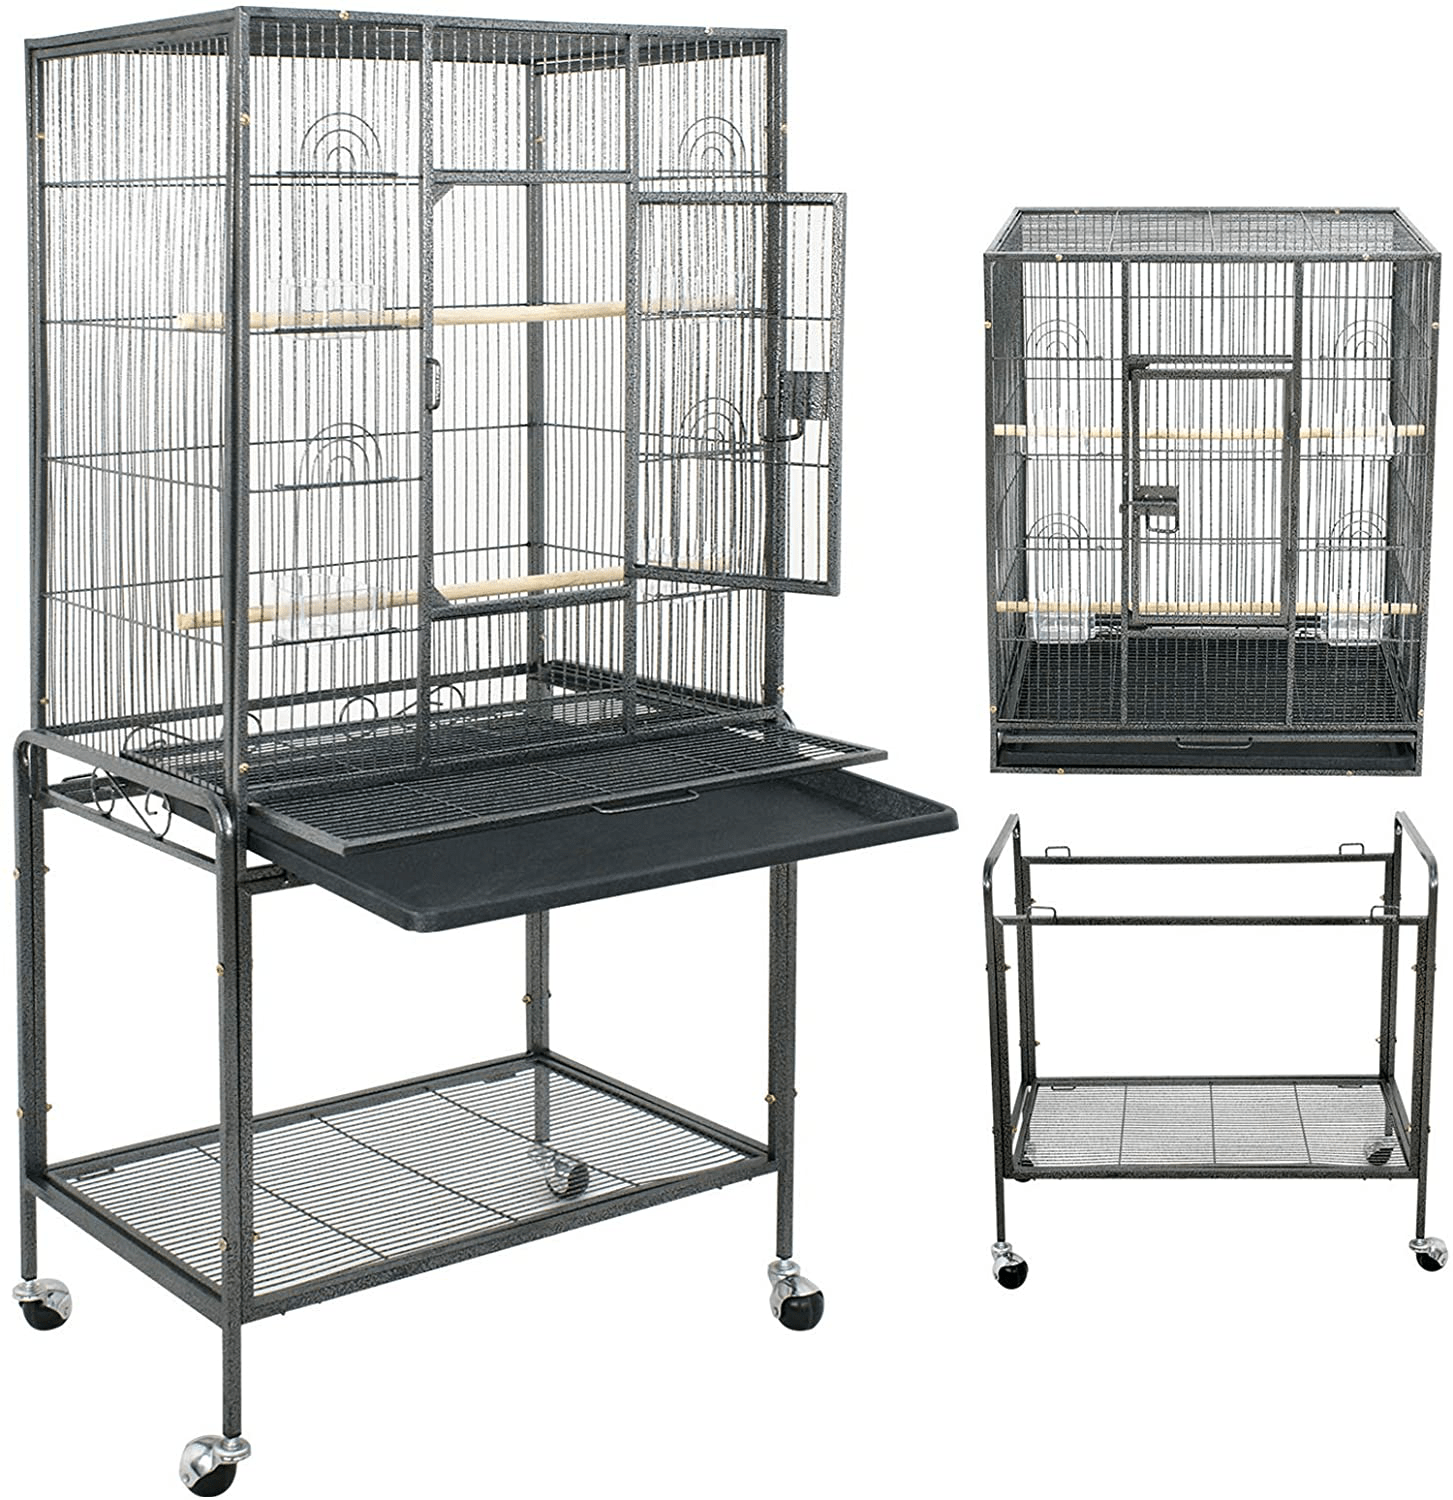 53 Inch Large Bird Cage Parrot Cockatiel Parakeet Macaw Cage W/Stand Perch Wrought Iron Pet Supplies